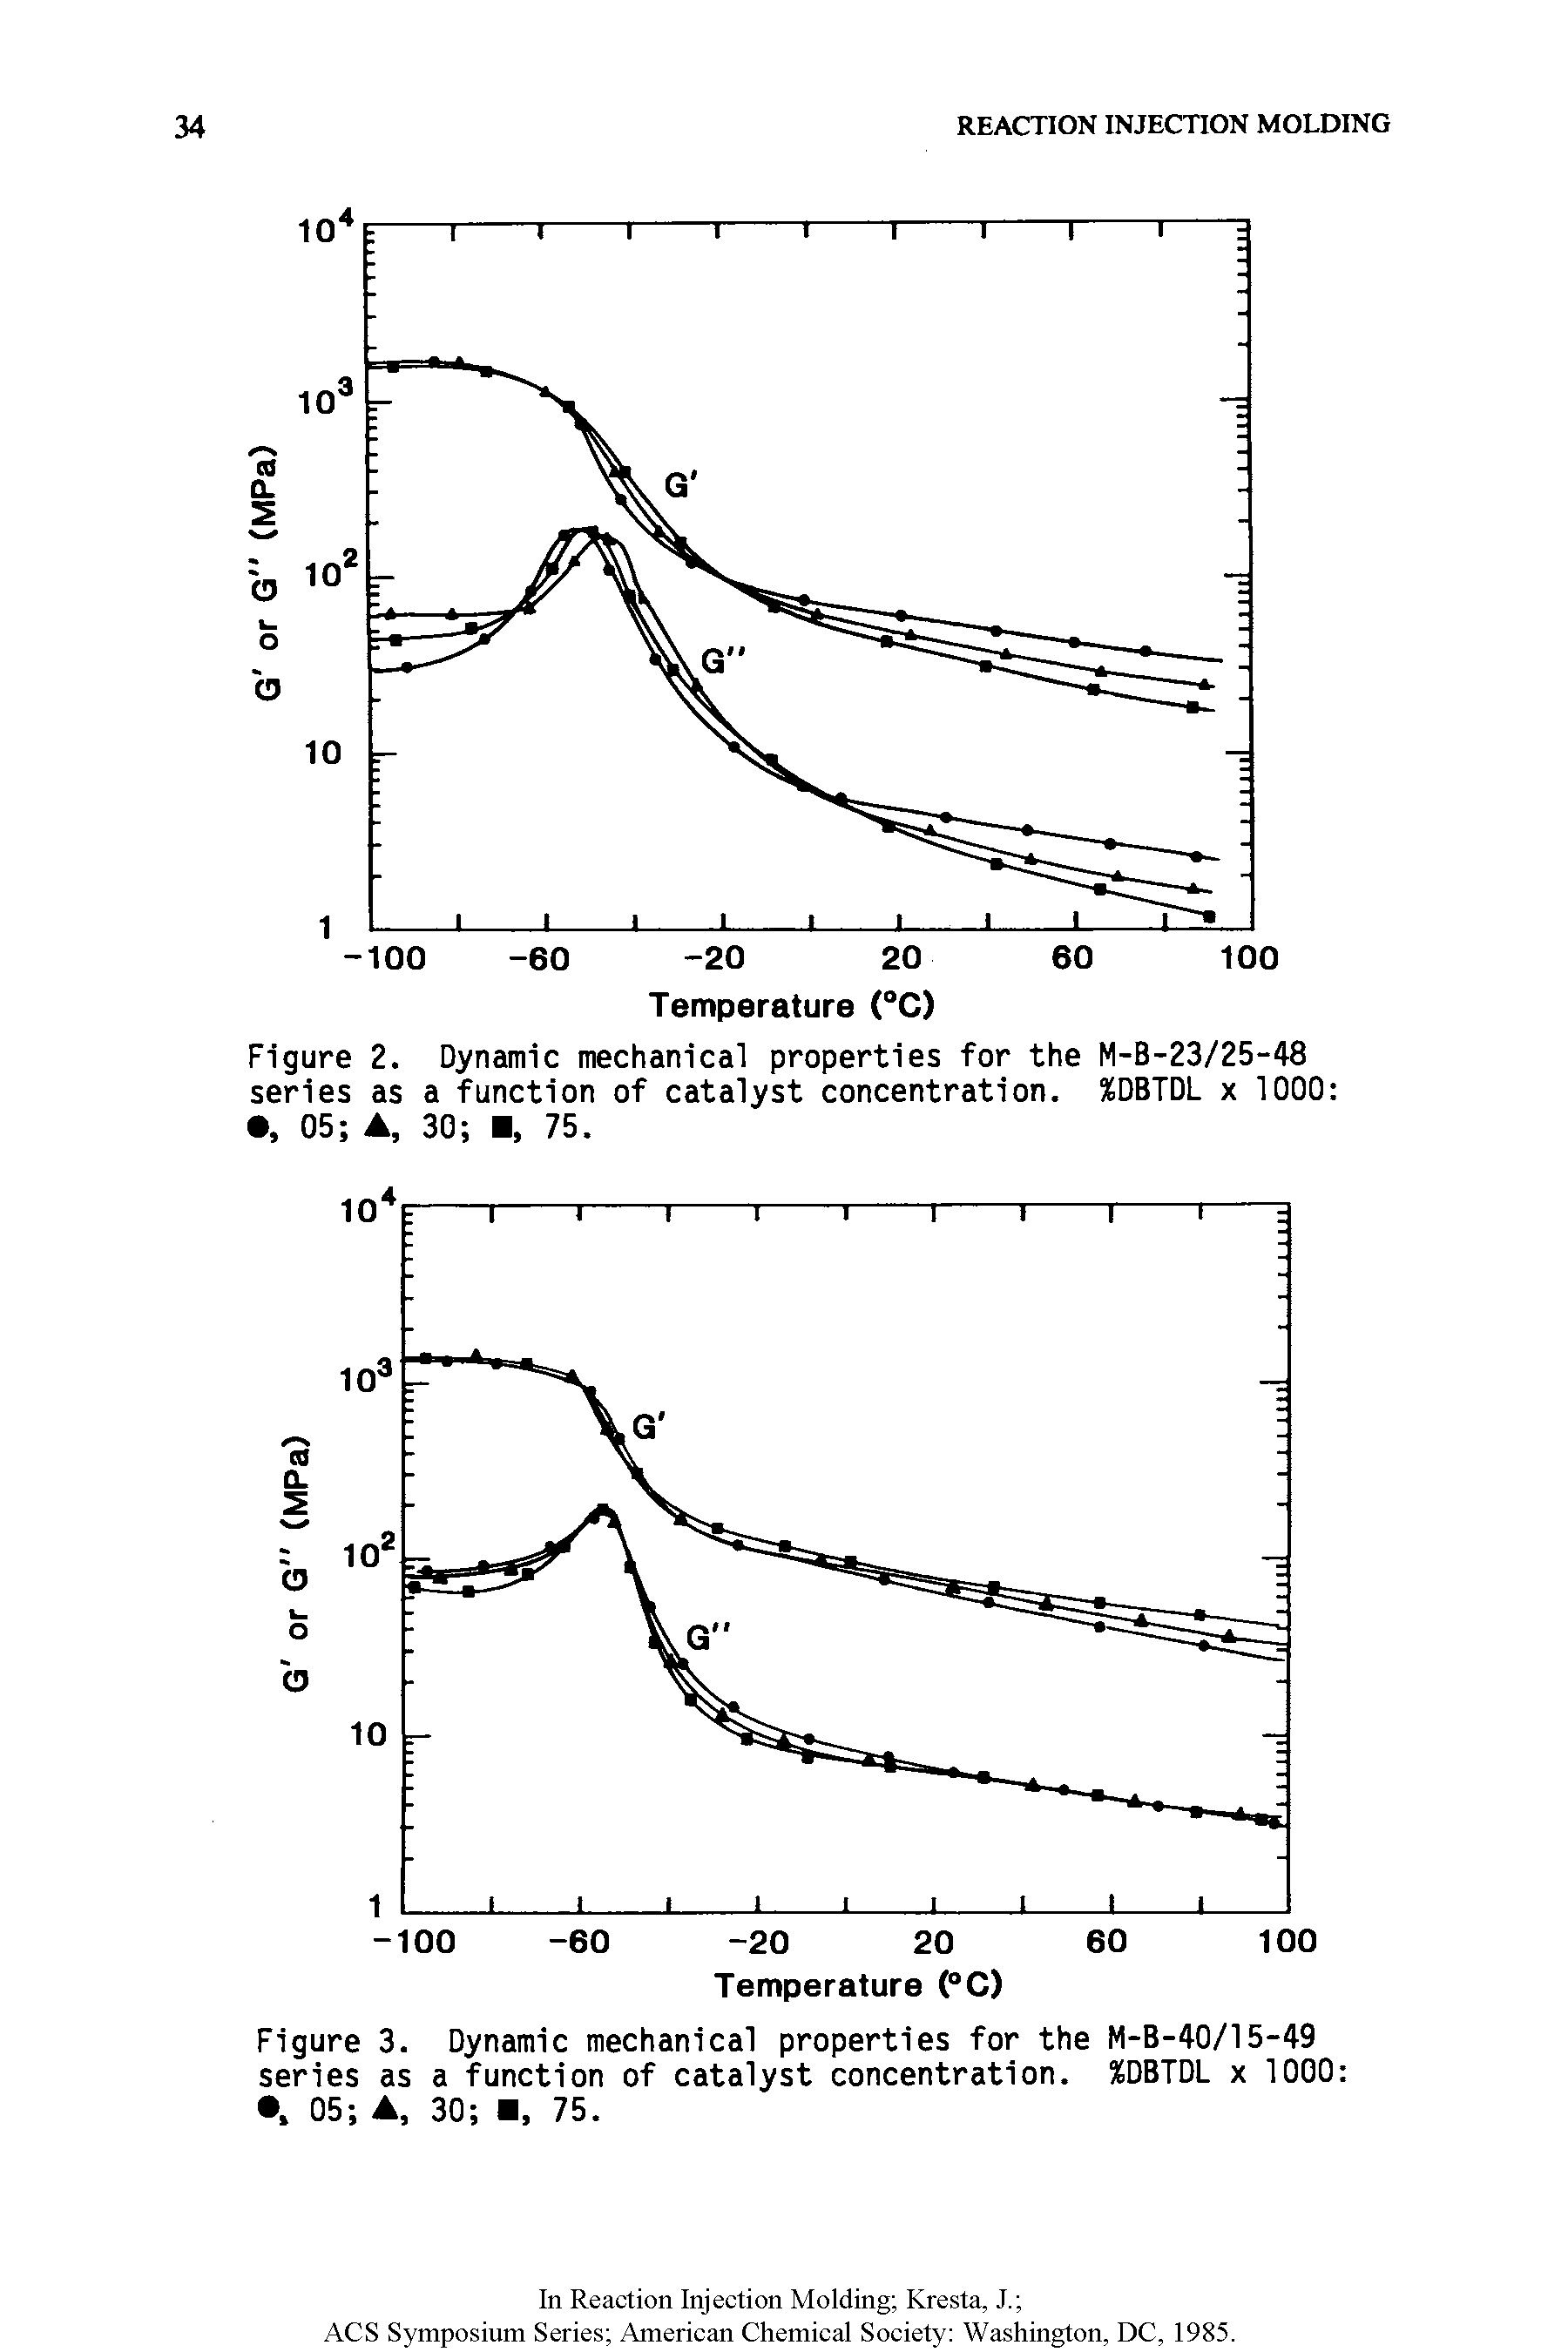 Figure 2. Dynamic mechanical properties for the M-B-23/25-48 series as a function of catalyst concentration. %DBTDL x 1000 , 05 , 30 , 75.